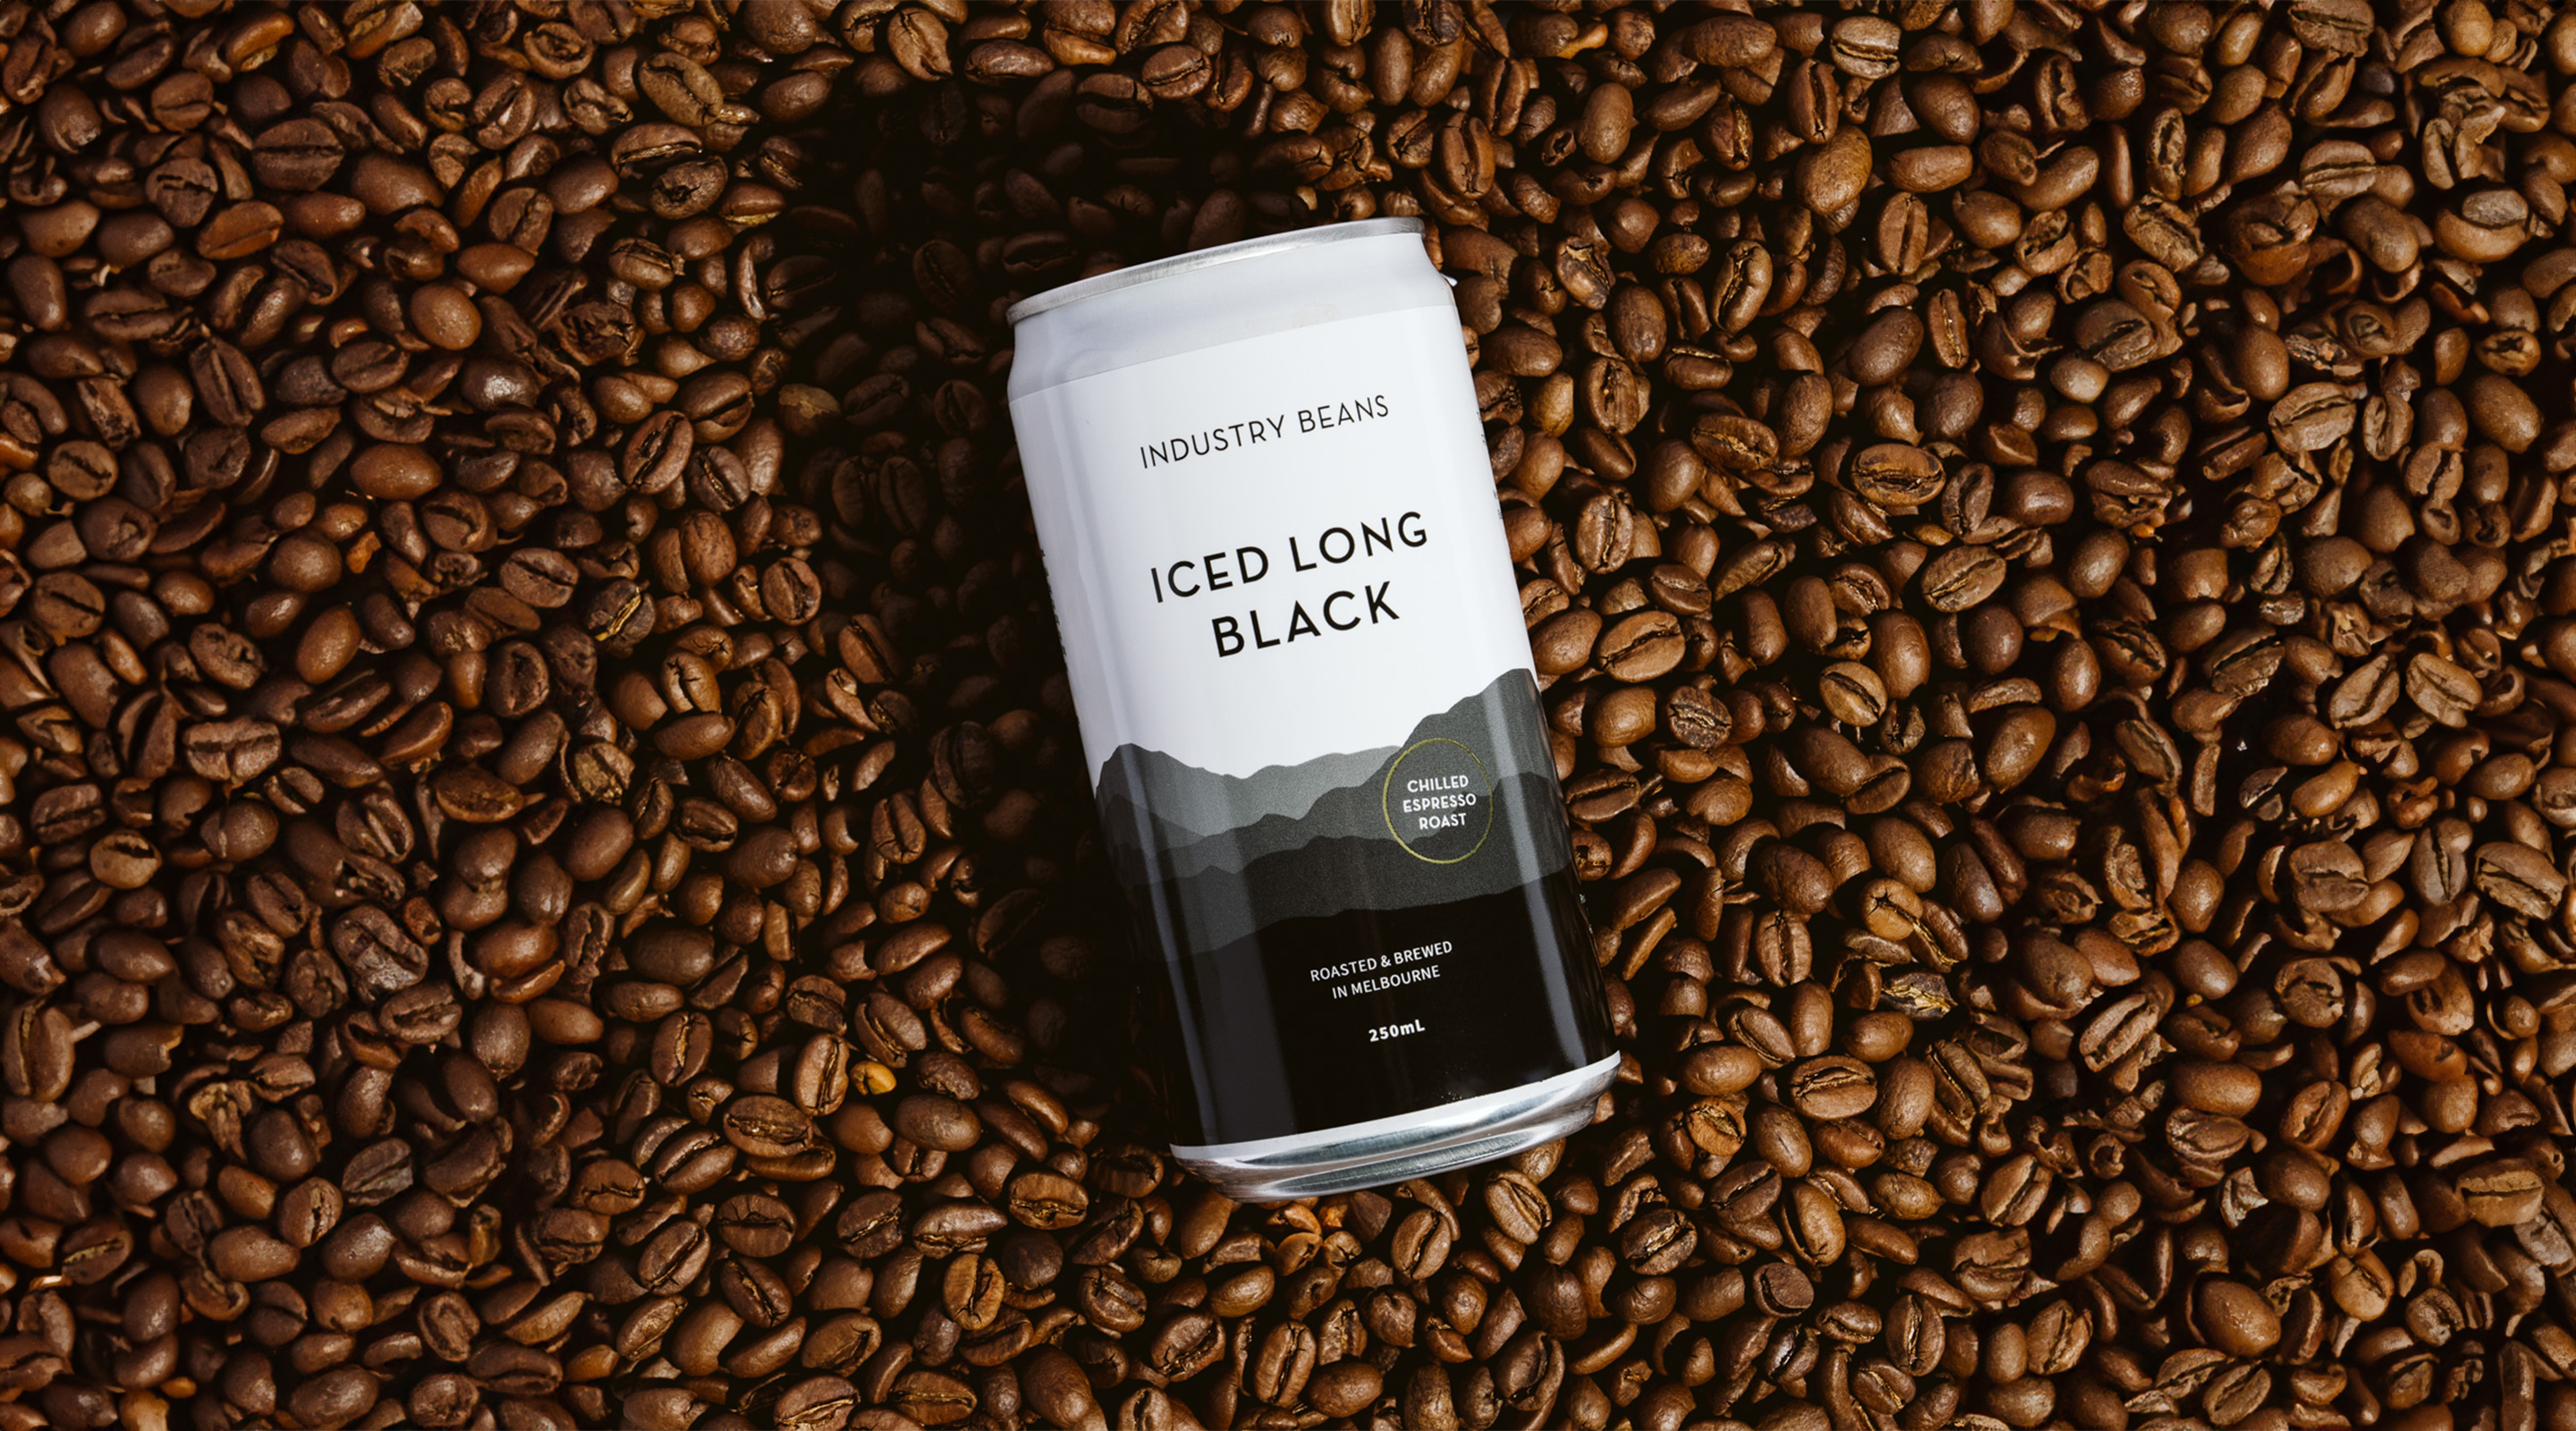 Iced Long Black Coffee Cans